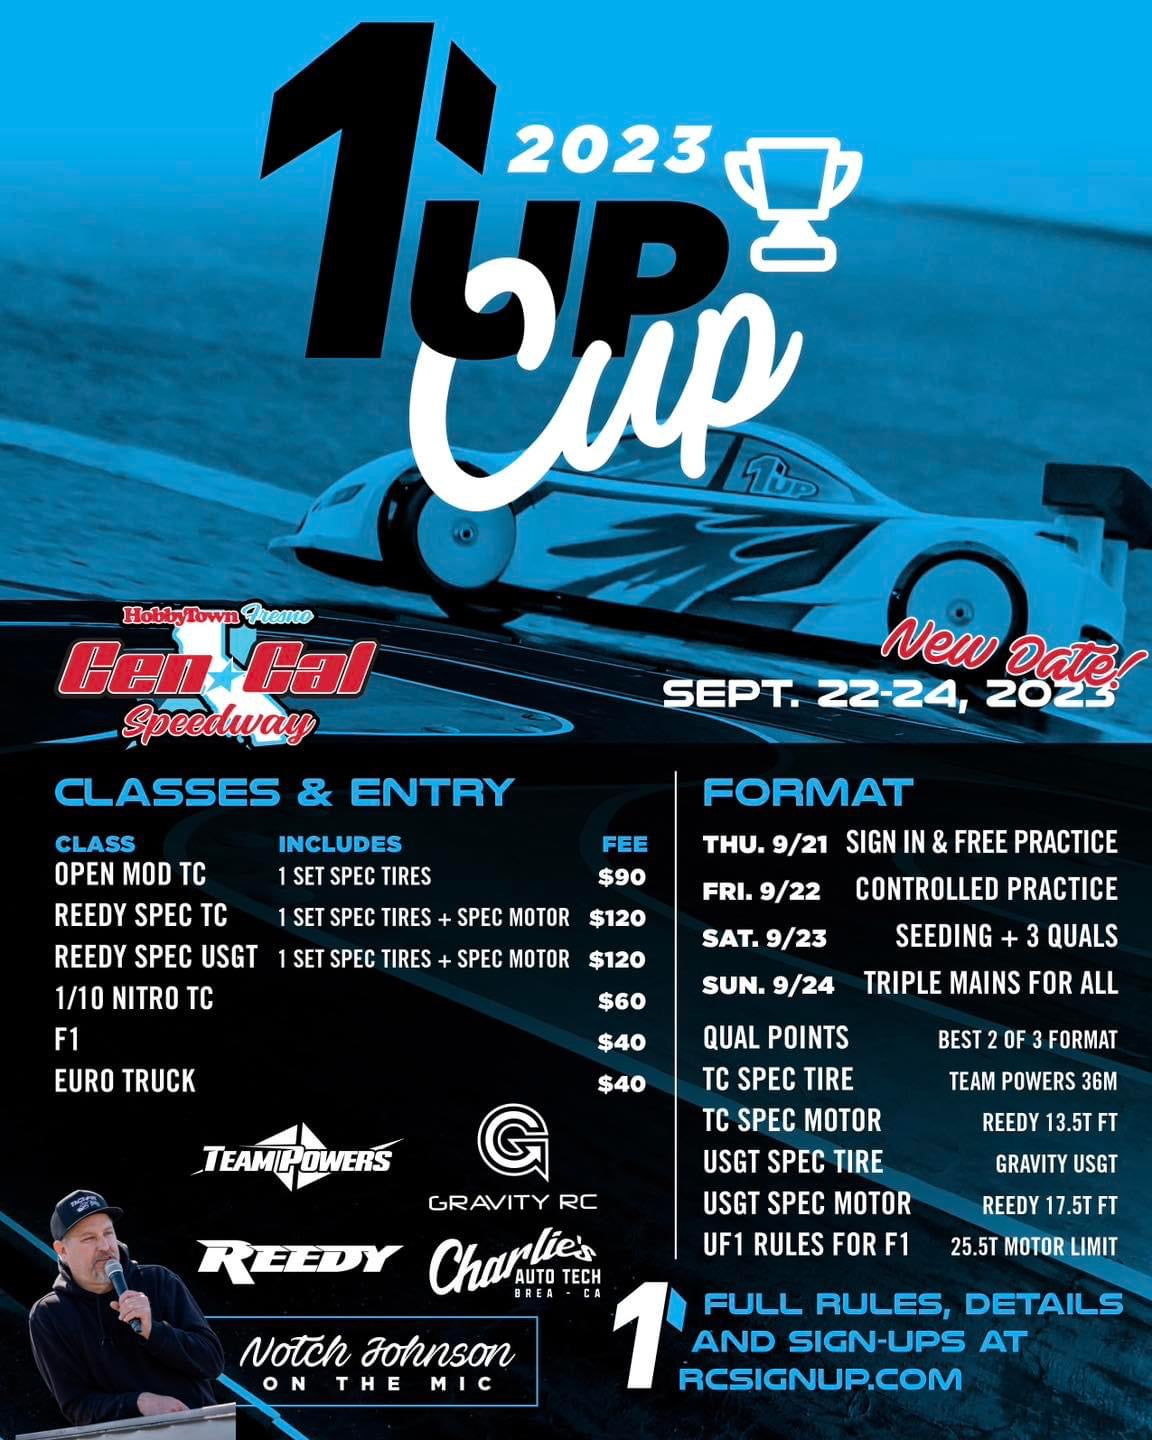 Free Practice Day at the 1up Cup